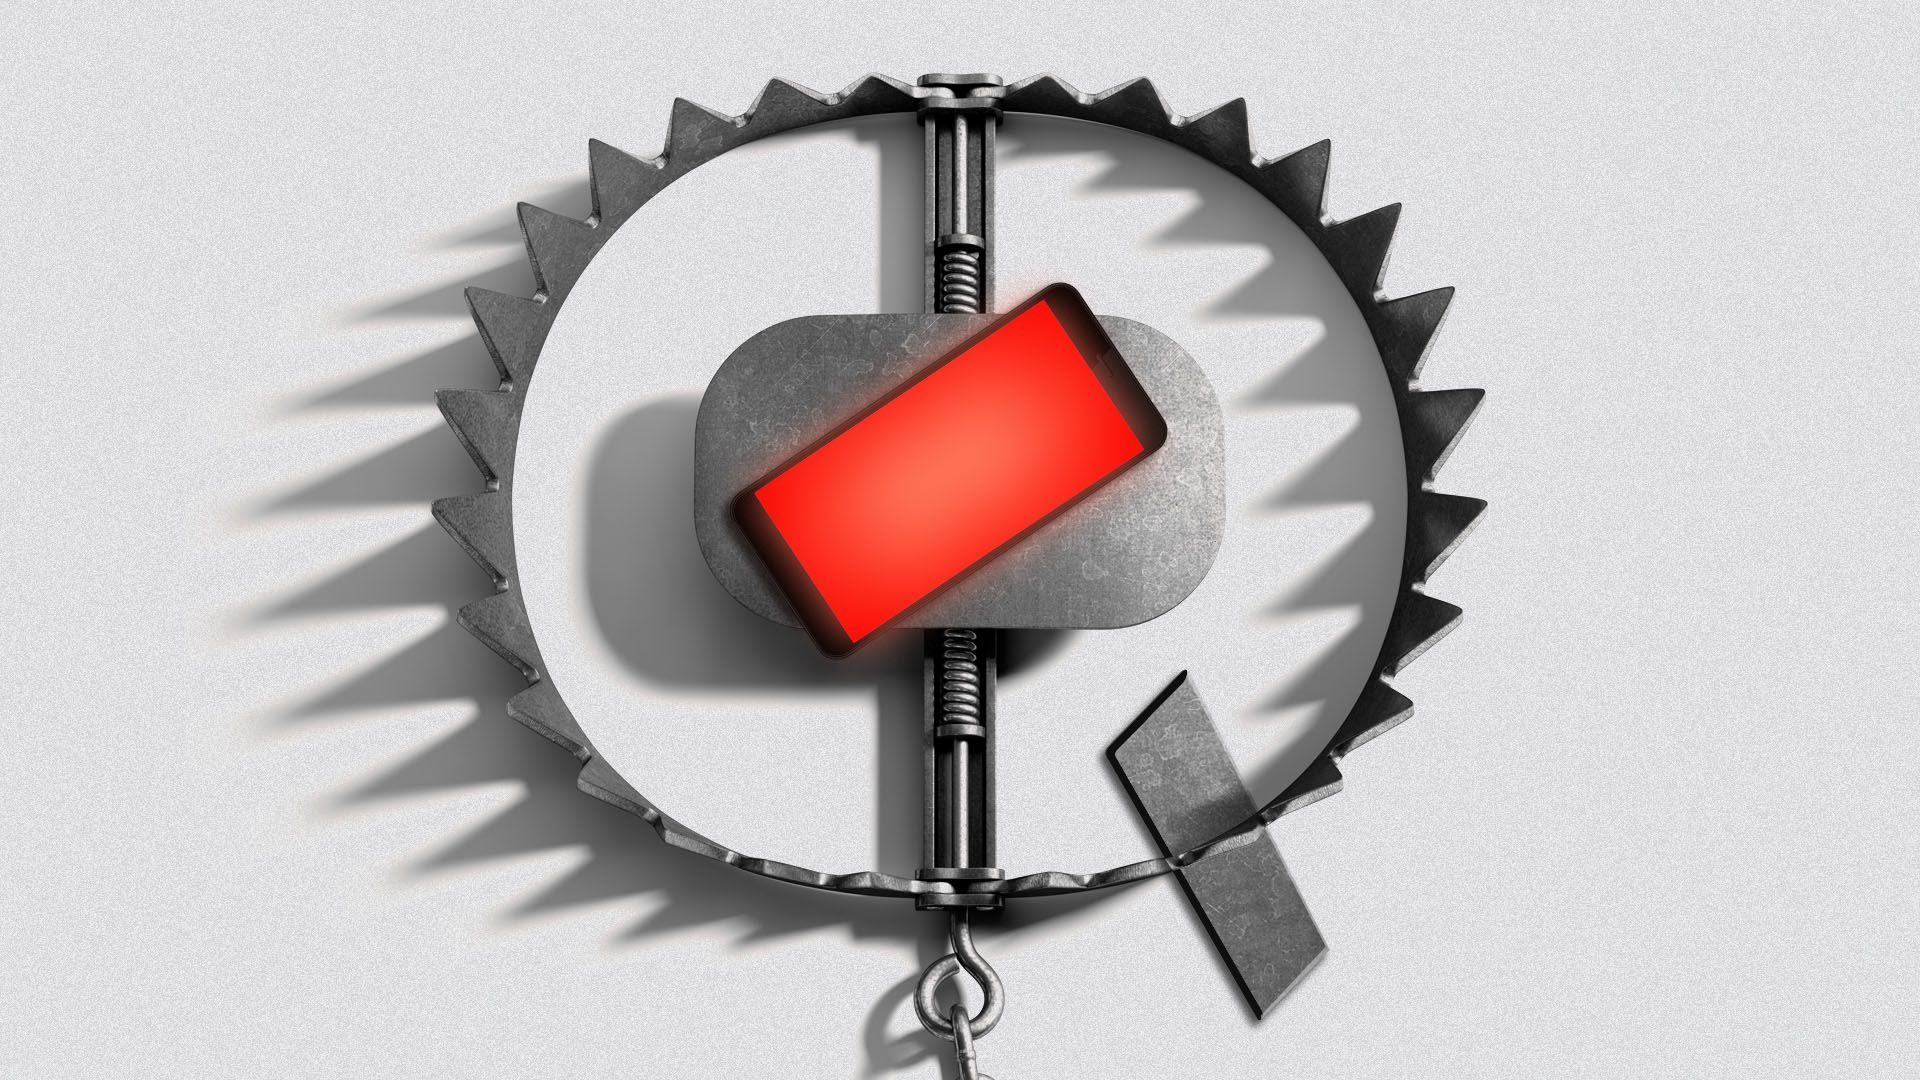 Illustration of a bear trap shaped like a "Q" with a glowing red phone in the middle